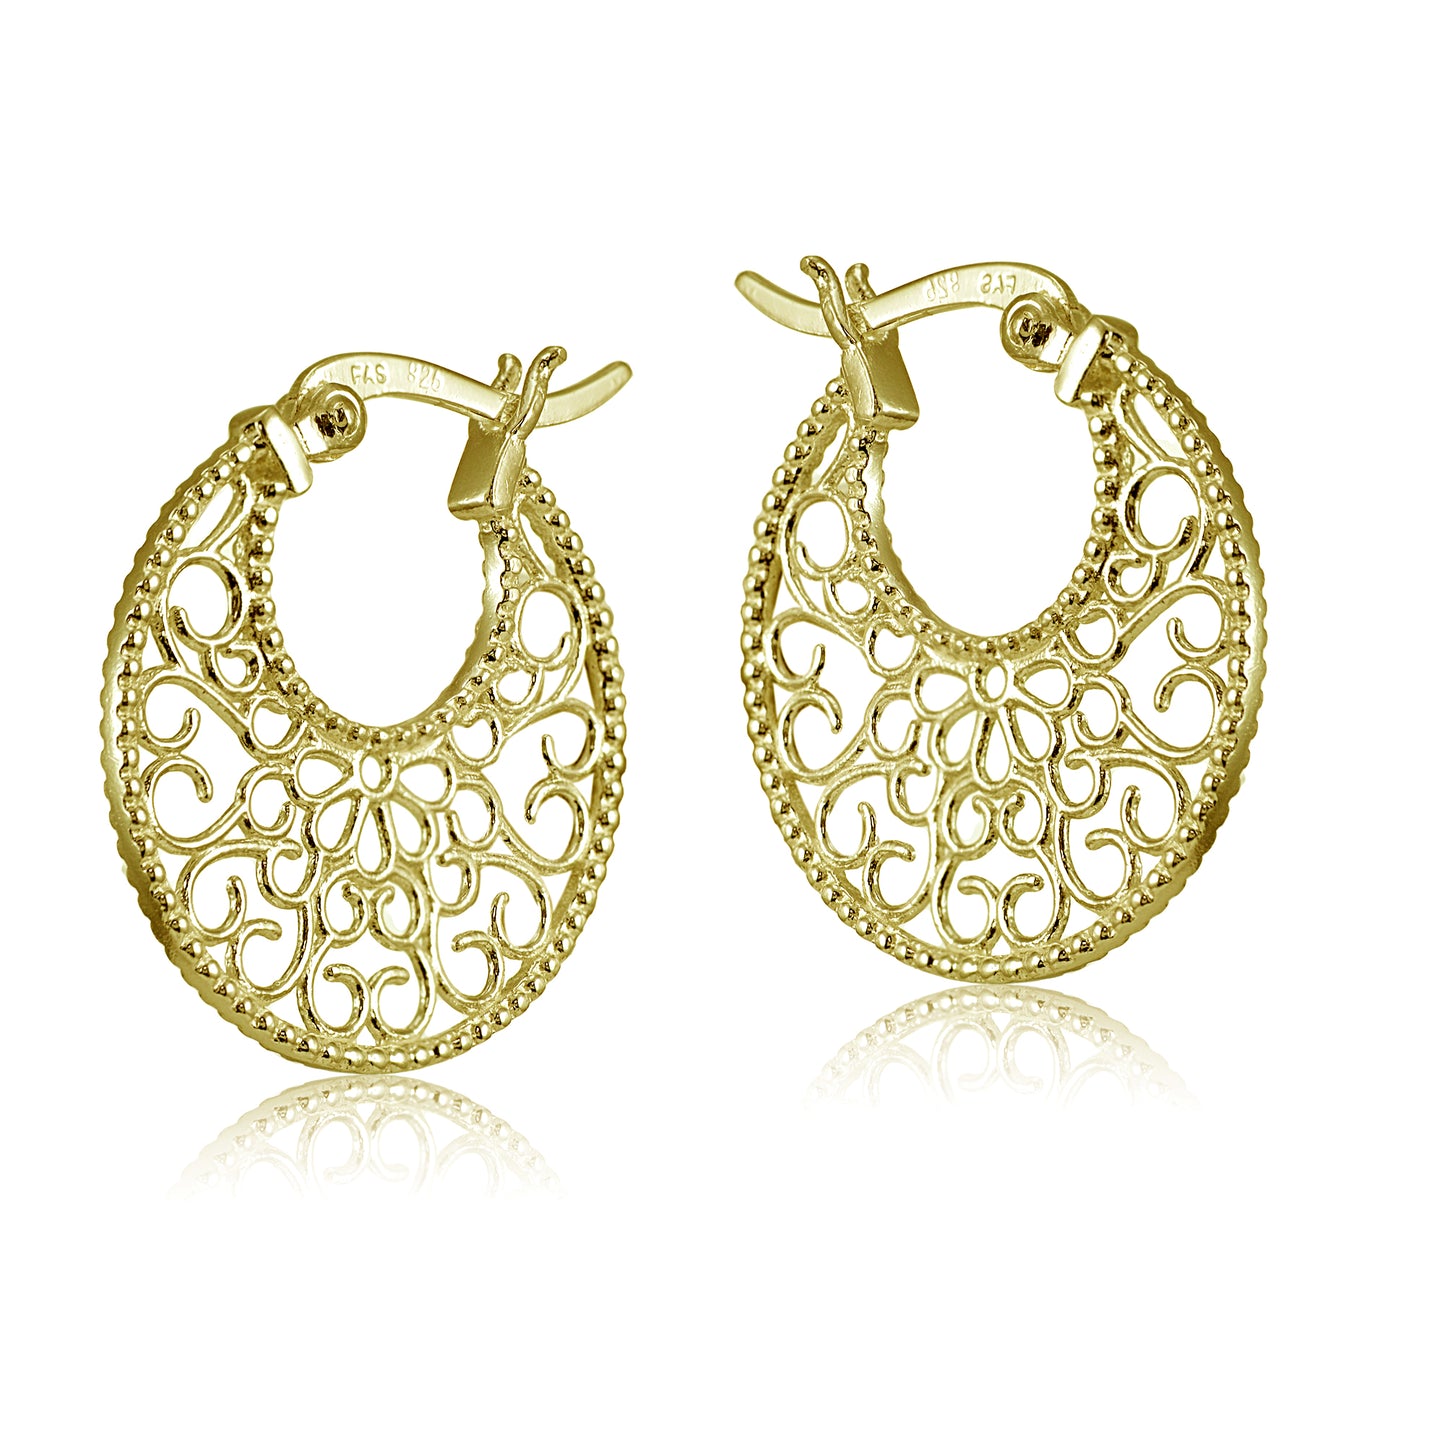 Gold Plated Sterling Silver Medallion Filigree High Polished Round Flat Earrings